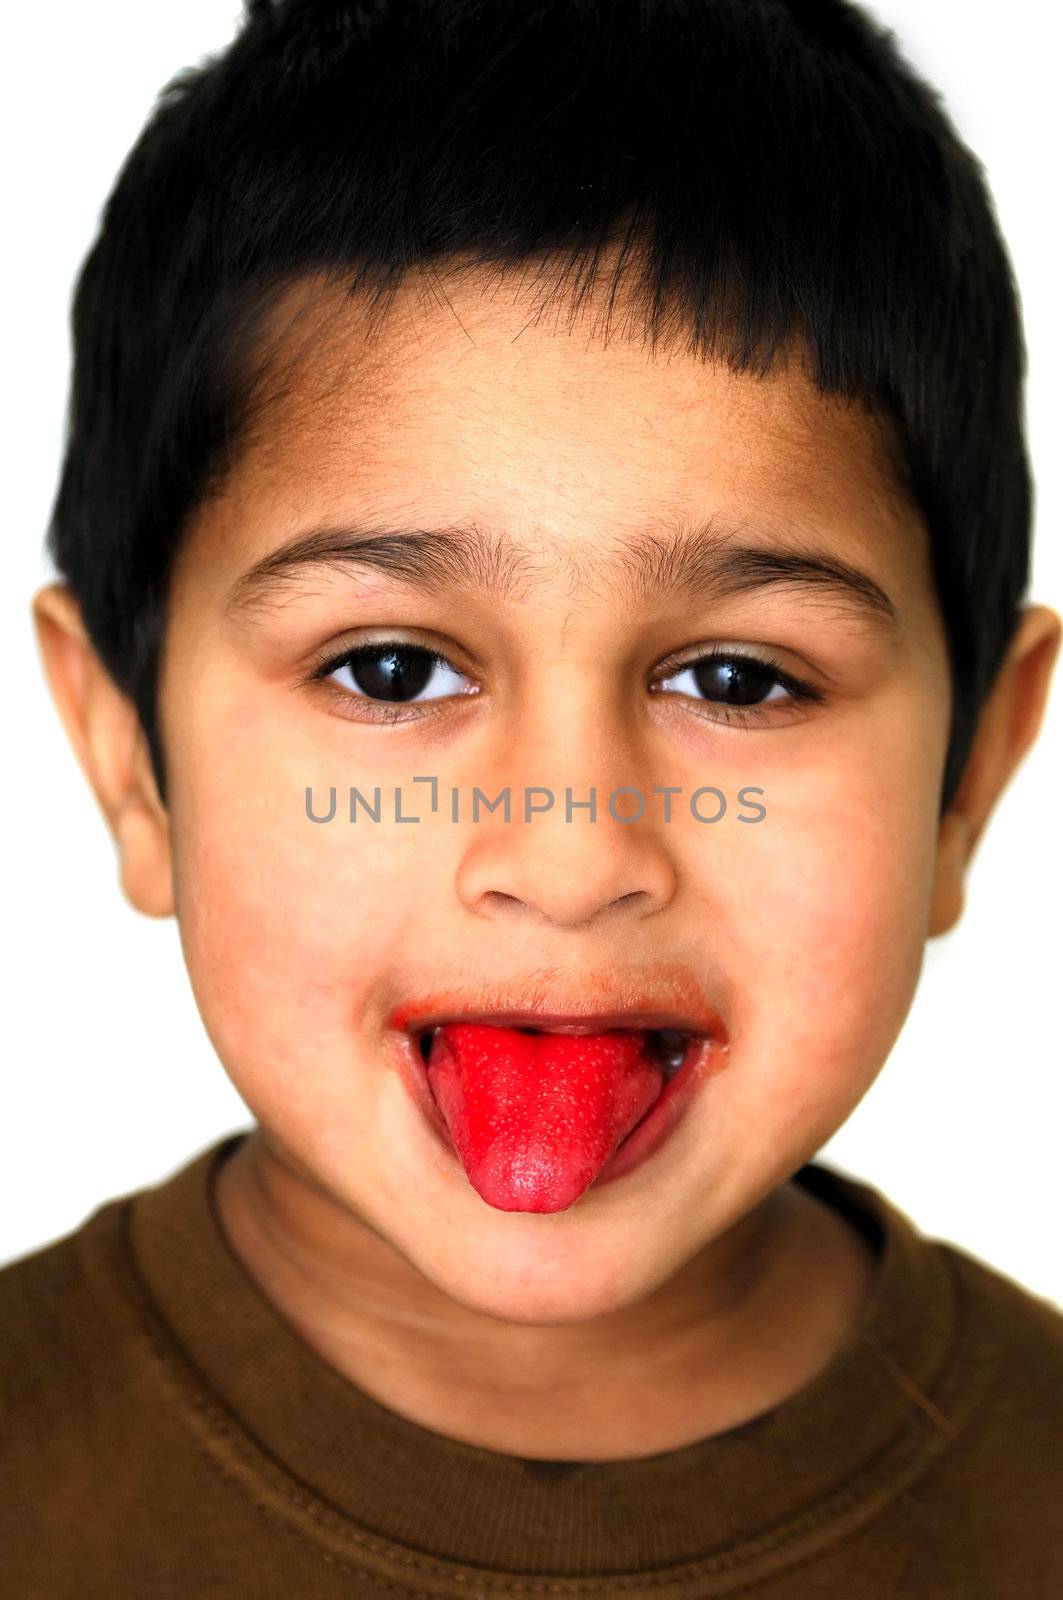 An handsome Kid showing his tongue after eating a candy